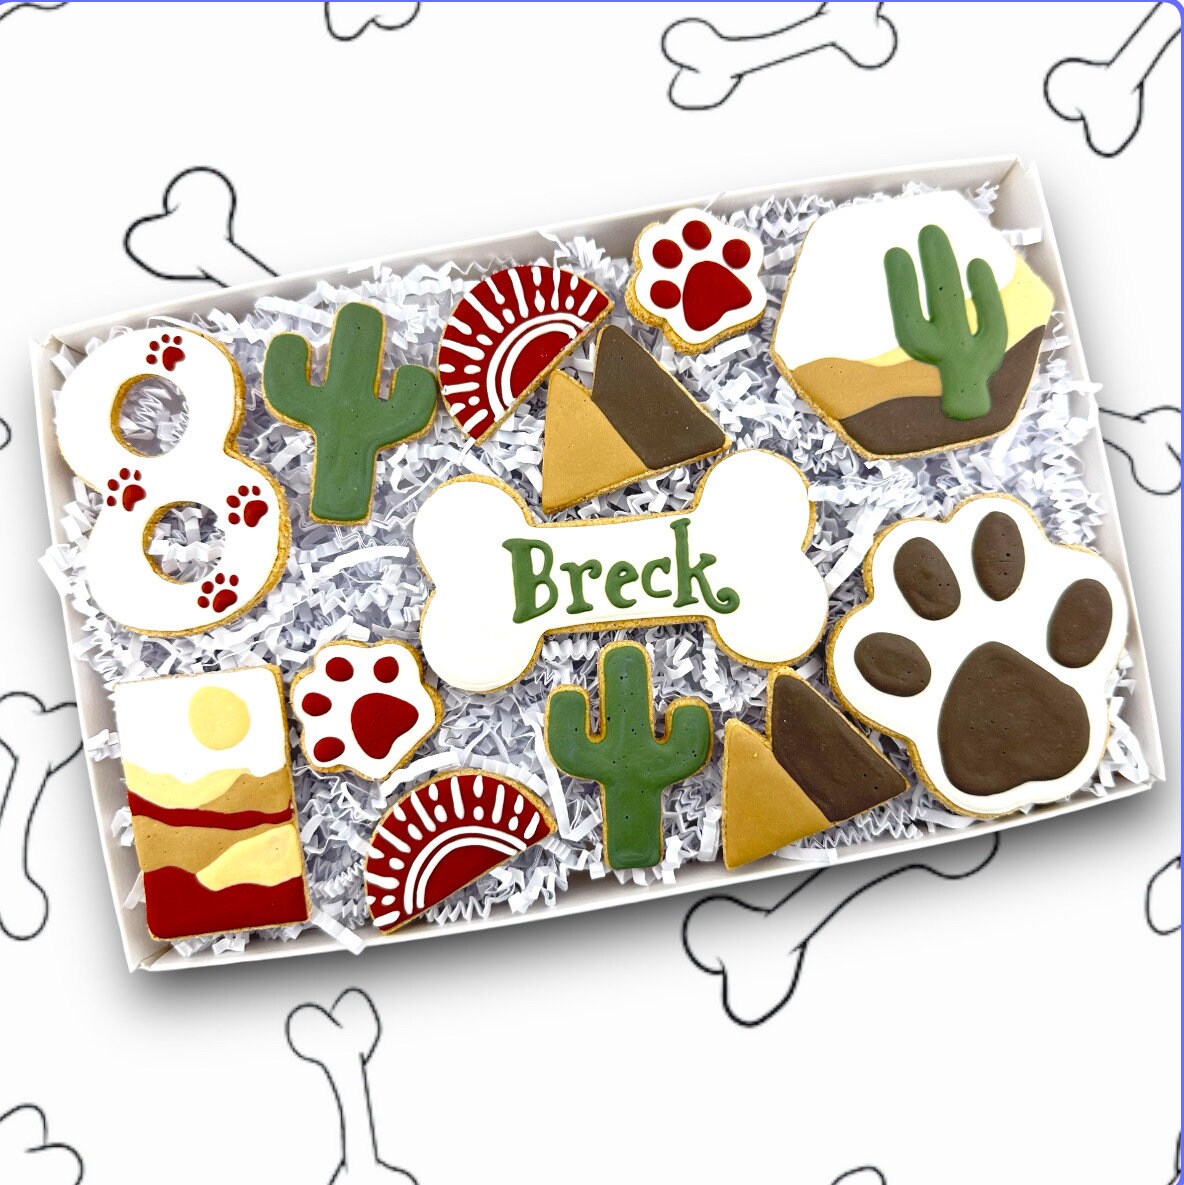 Paw Prize- Personalized / Birthday / Dog Treats / Organic / Simple Ingredients / All Natural / Pawsome Treats